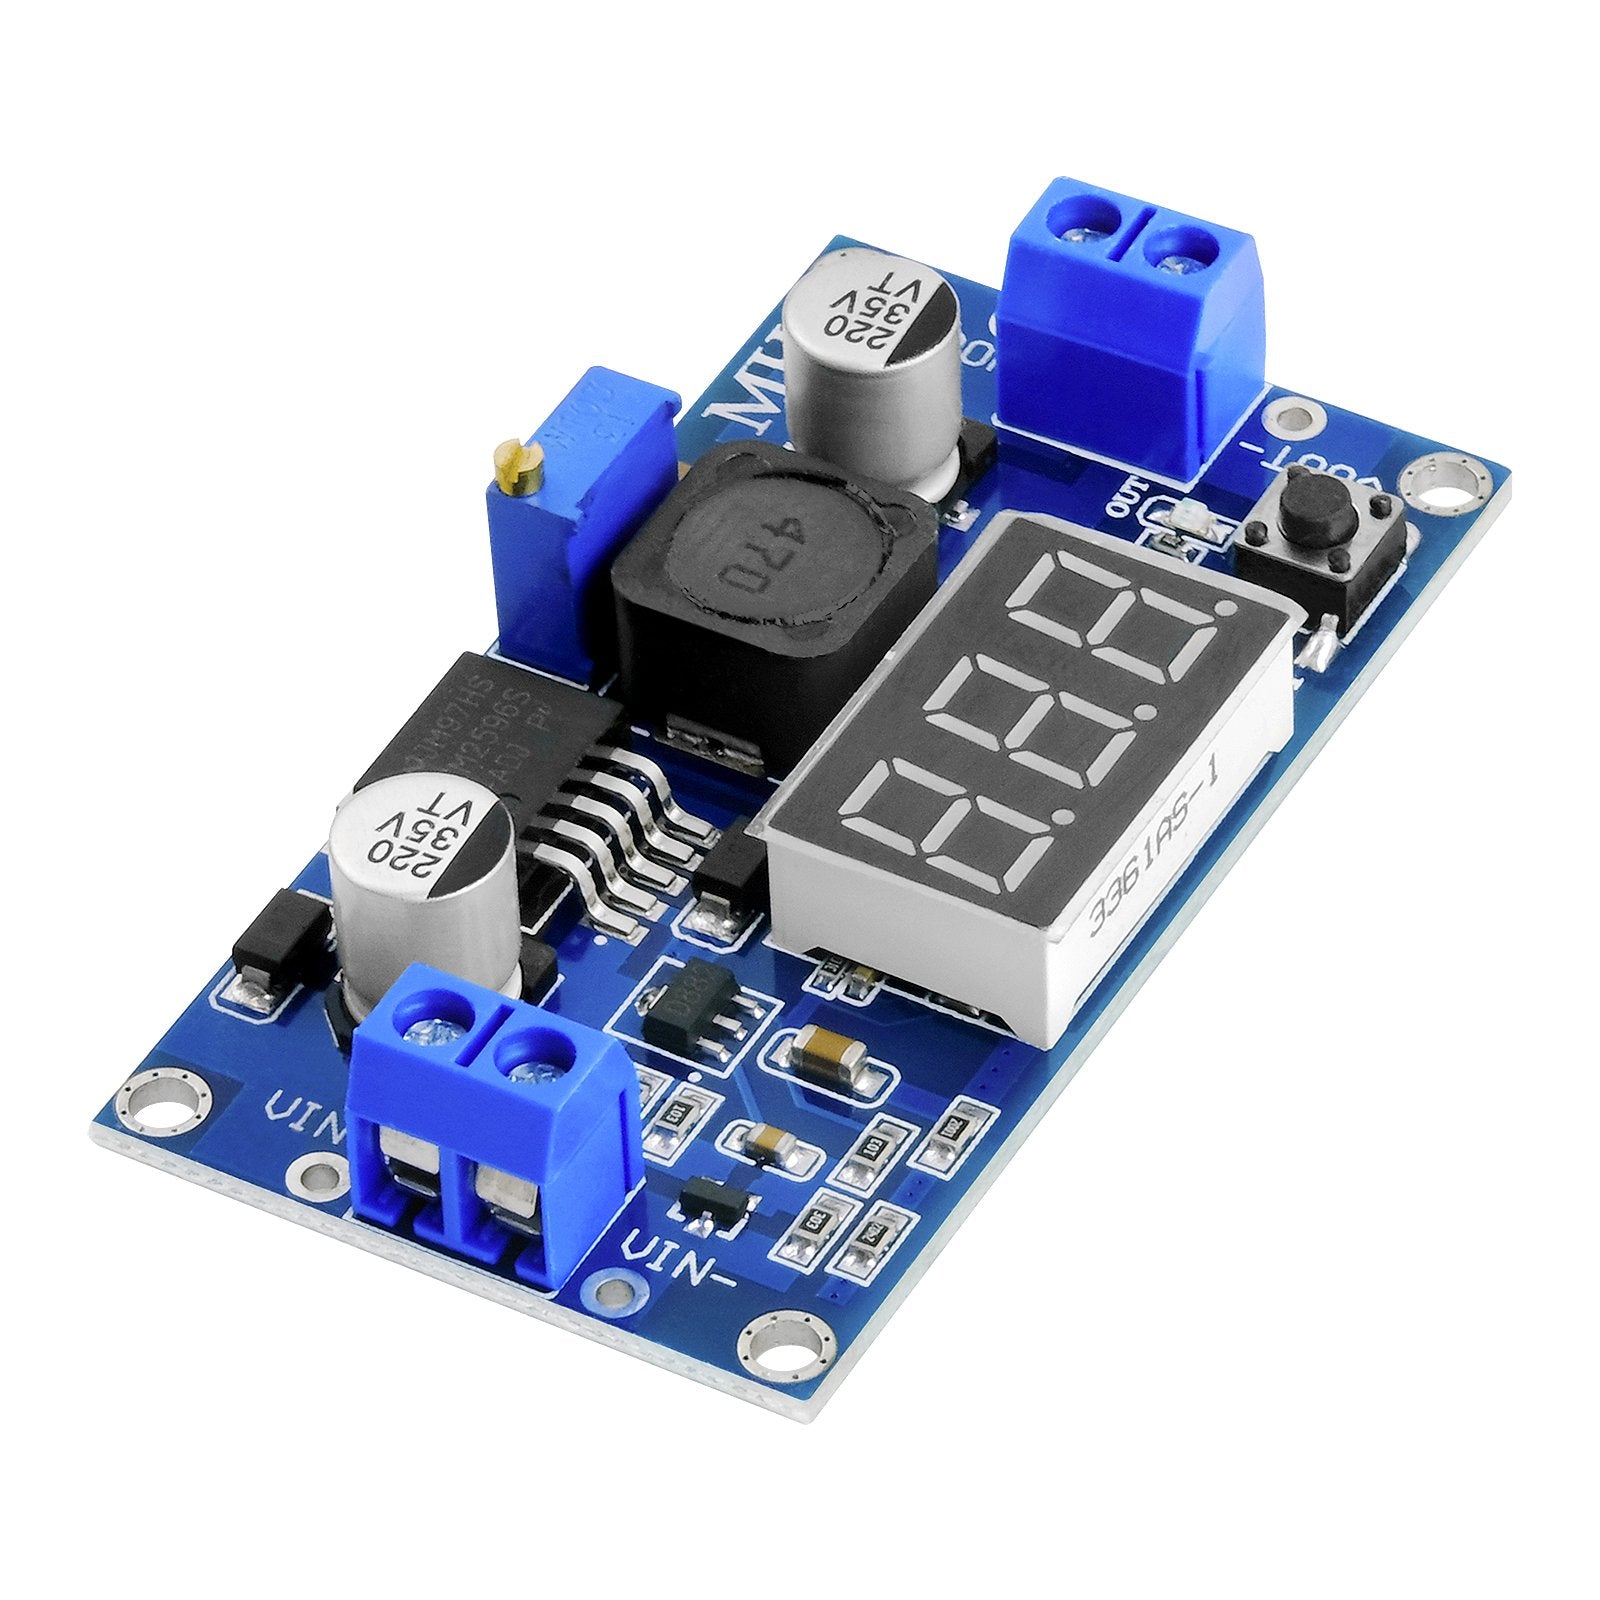 LM2596S STEP-Down DC-DC Buck Converter with a 3-digit digital display